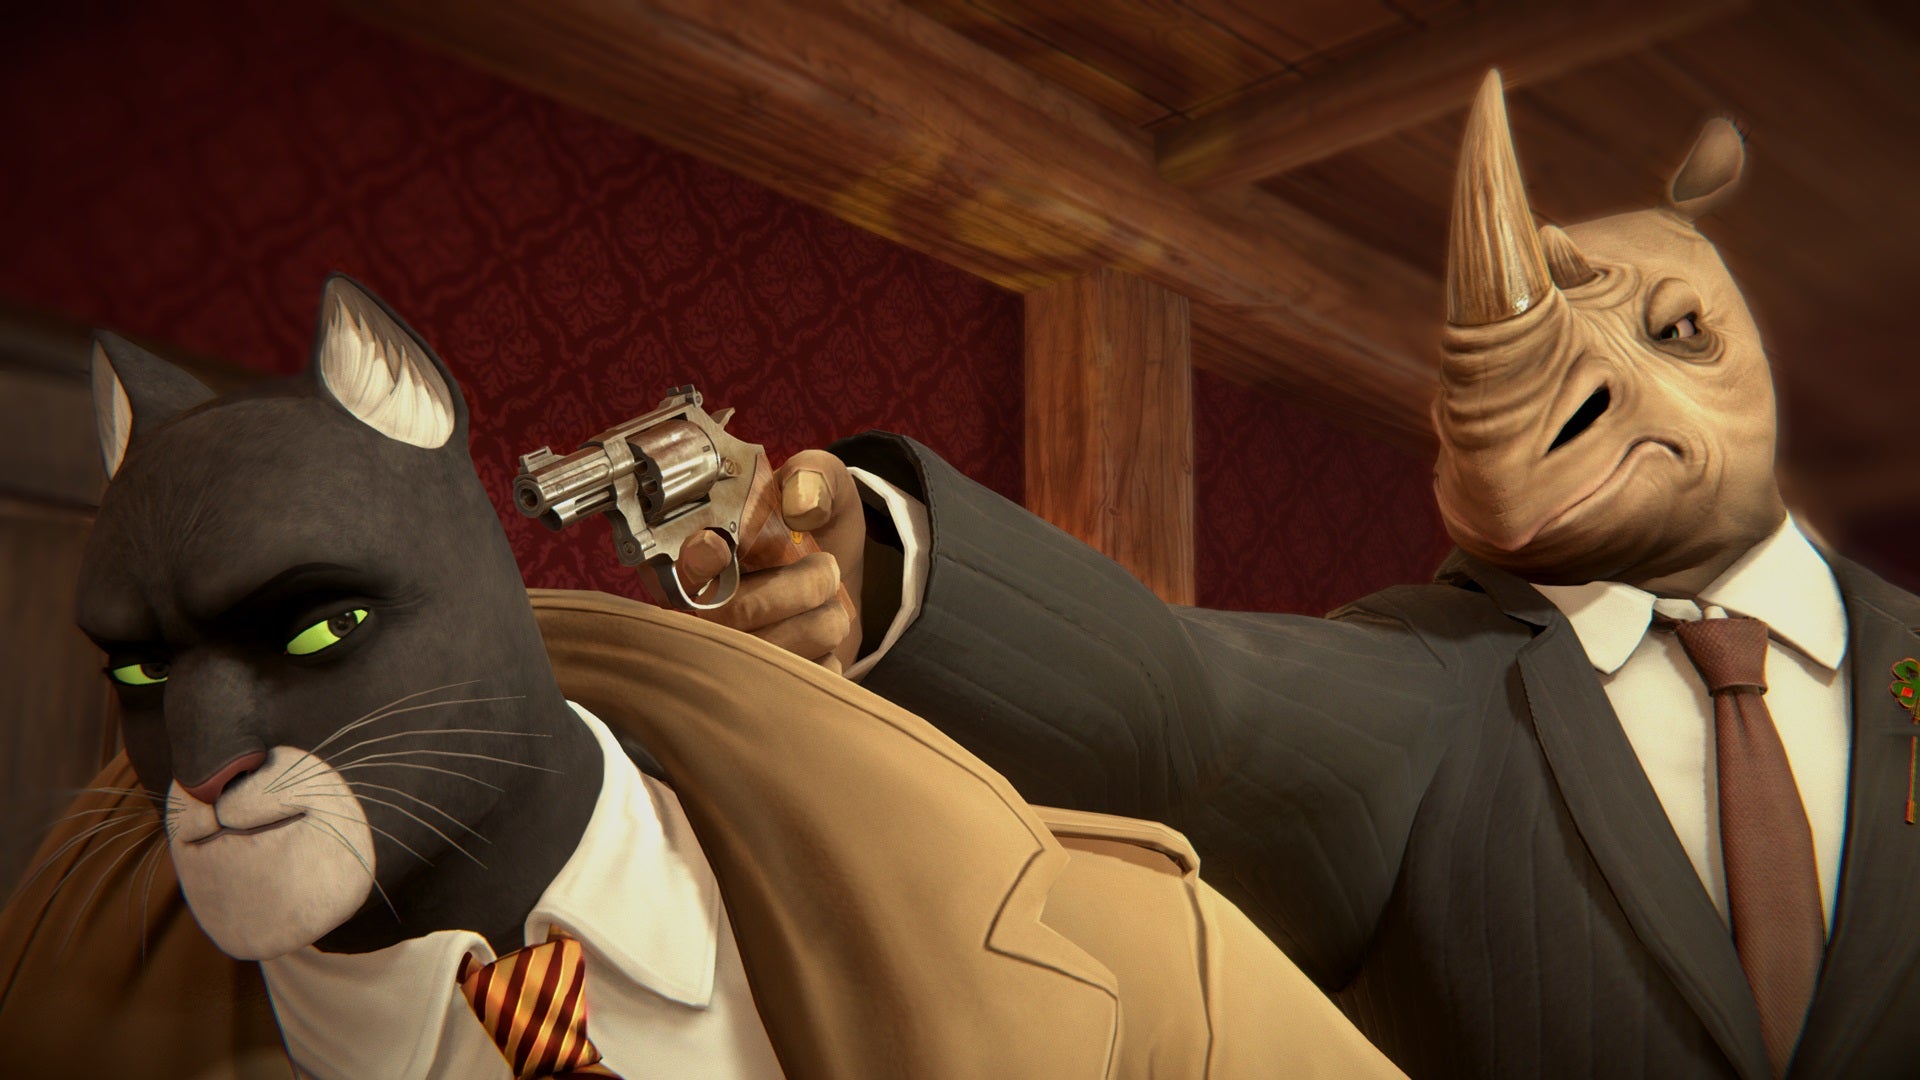 Can Blacksad really be made into a video game? Rock Paper Shotgun